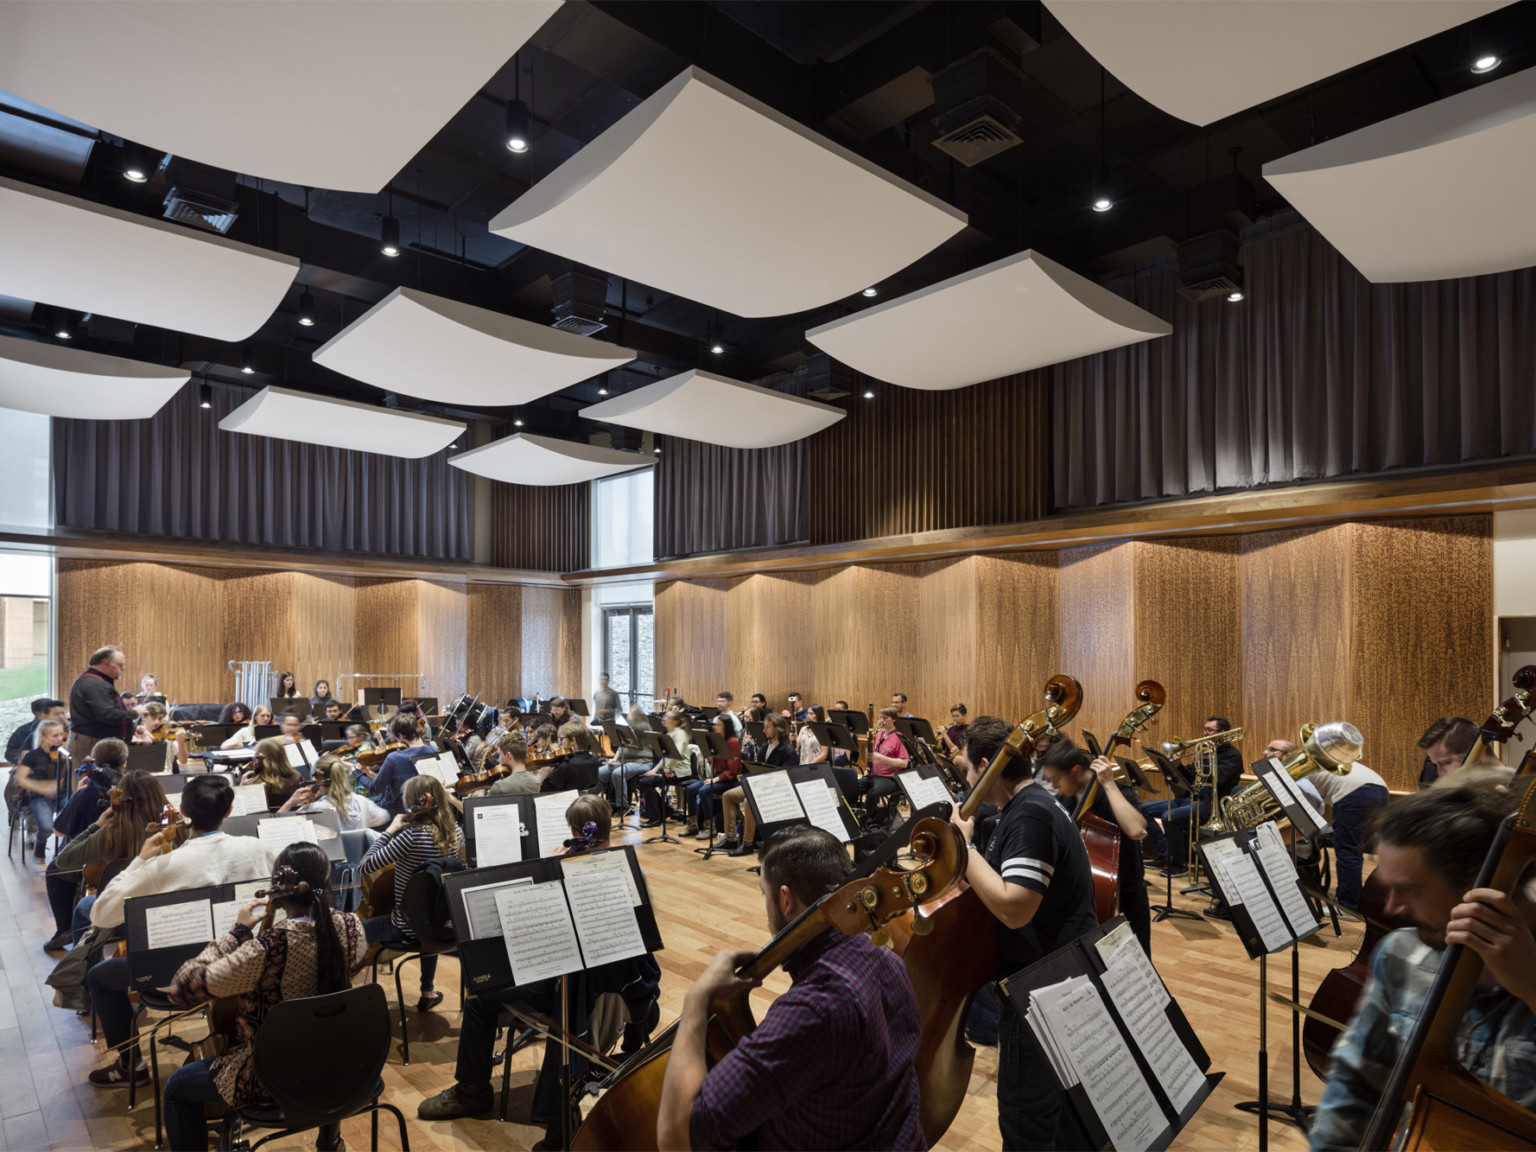 Student musicians rehearsing in studio with angled wood panels on the walls and white acoustical sound panels on the ceiling